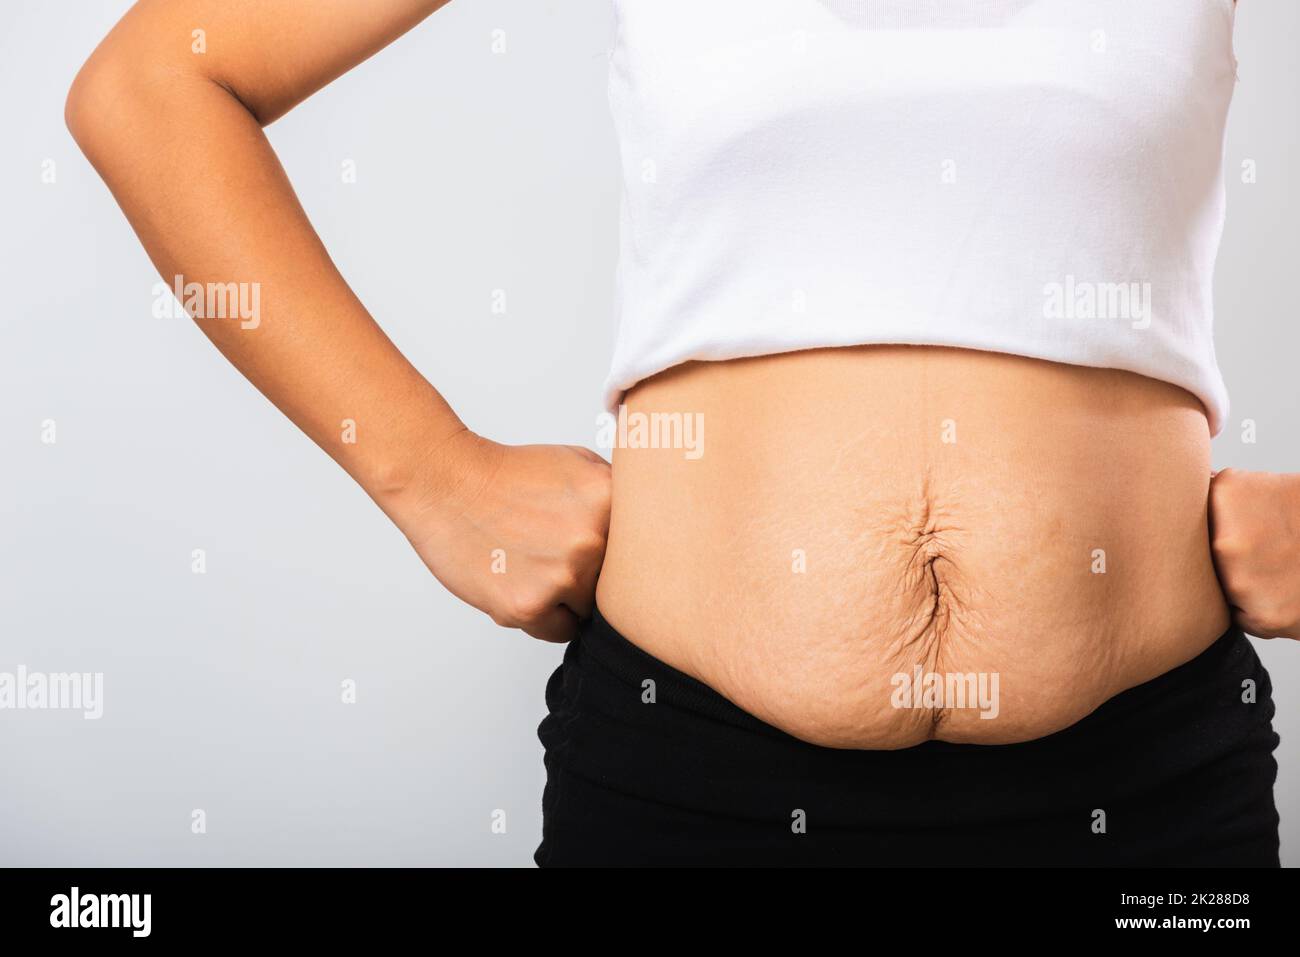 woman showing stretch mark loose lower abdomen skin she fat after pregnancy baby birth Stock Photo